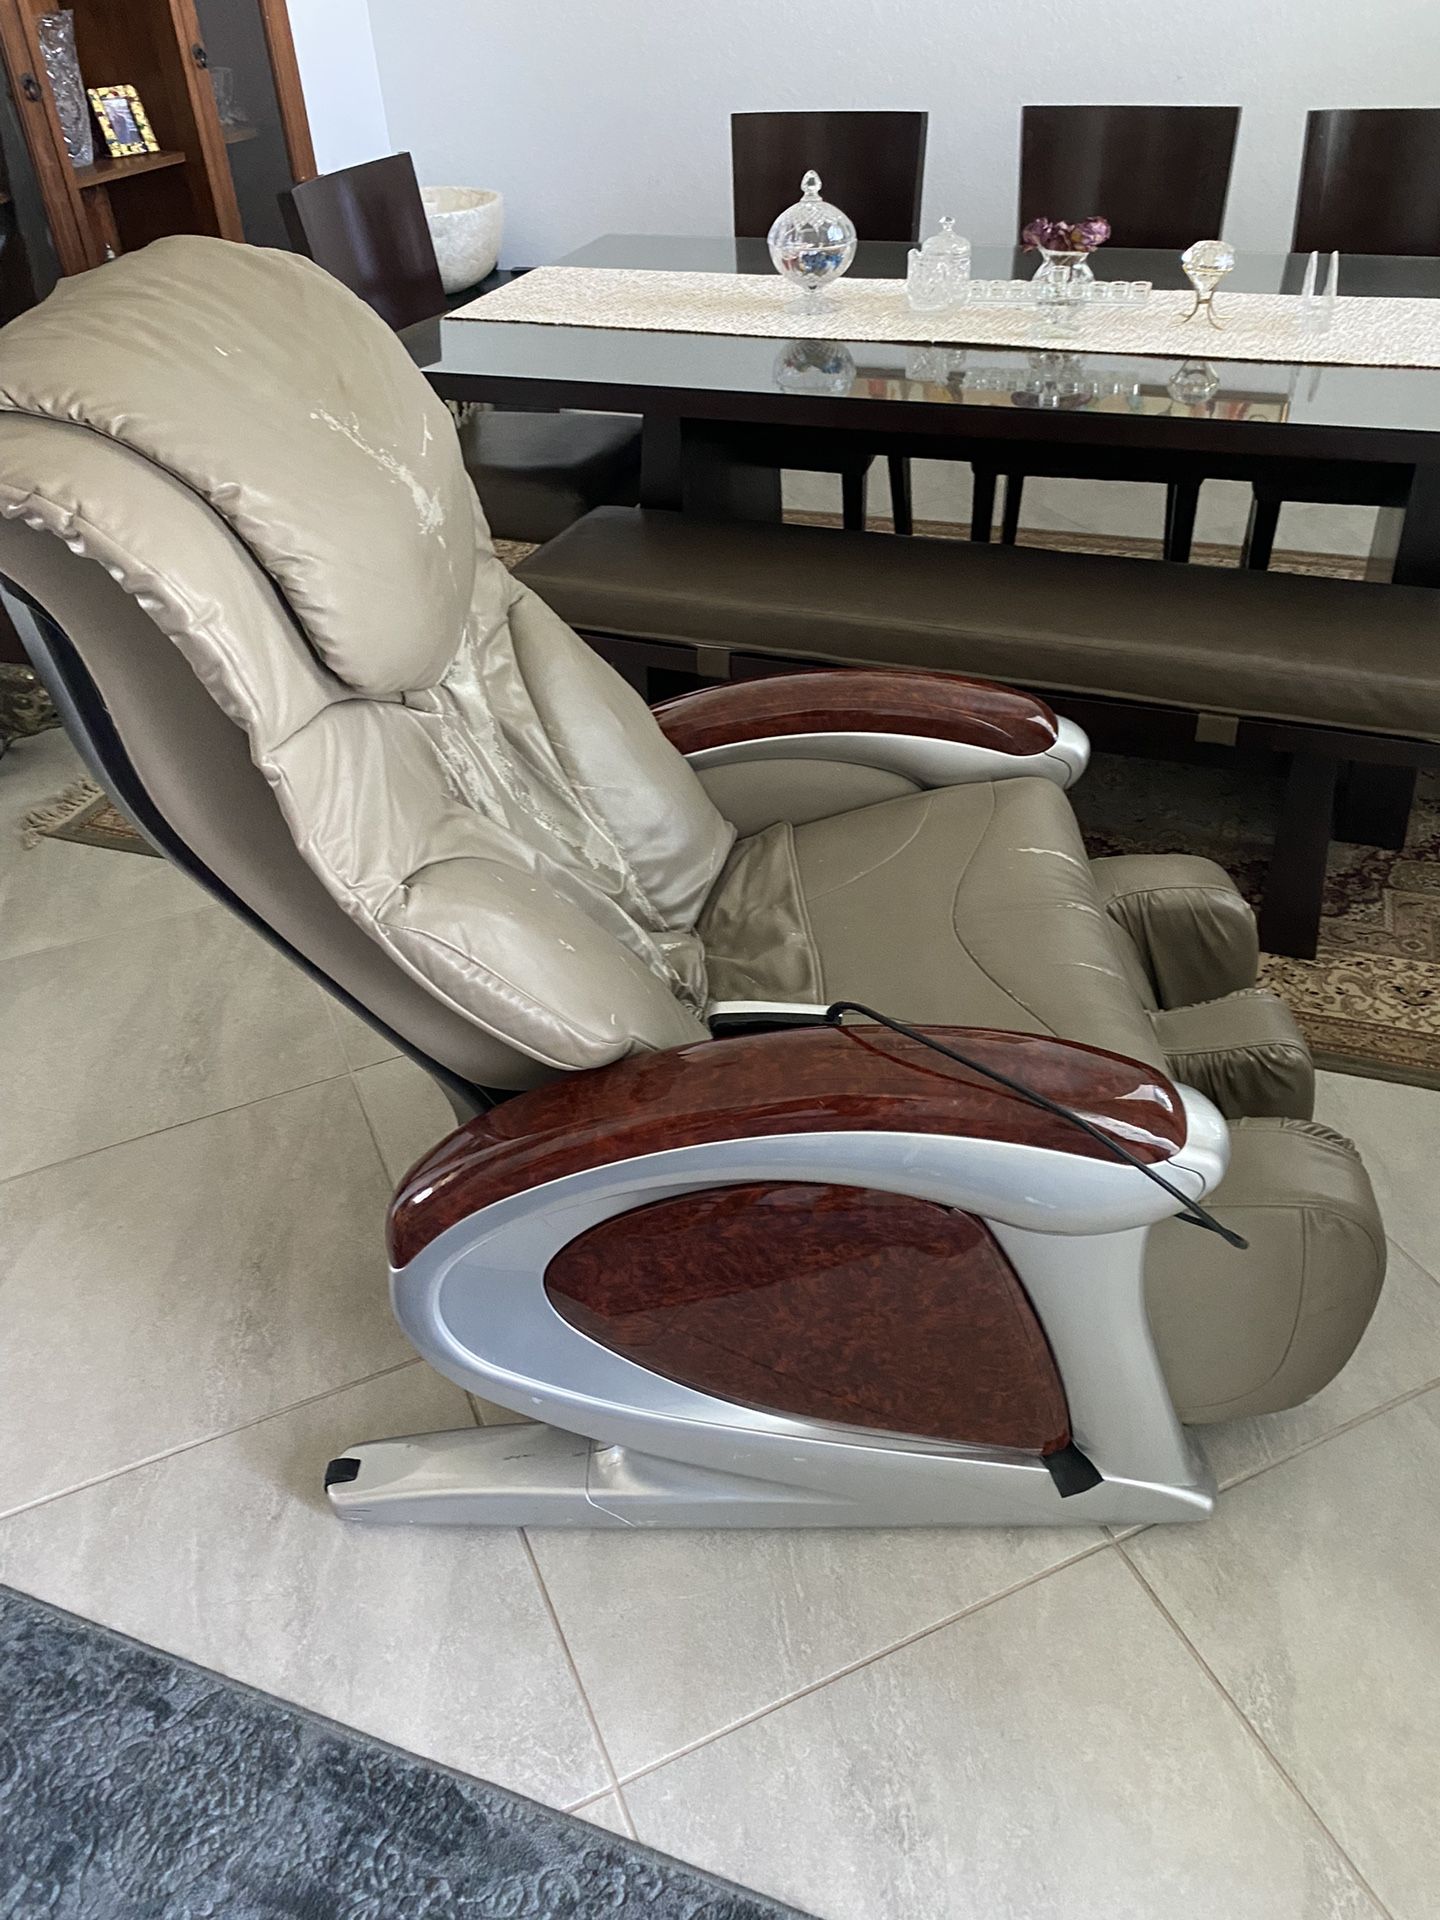 King Kong Deluxe Acupuncture Point Air Massage Chair Galaxy D3000